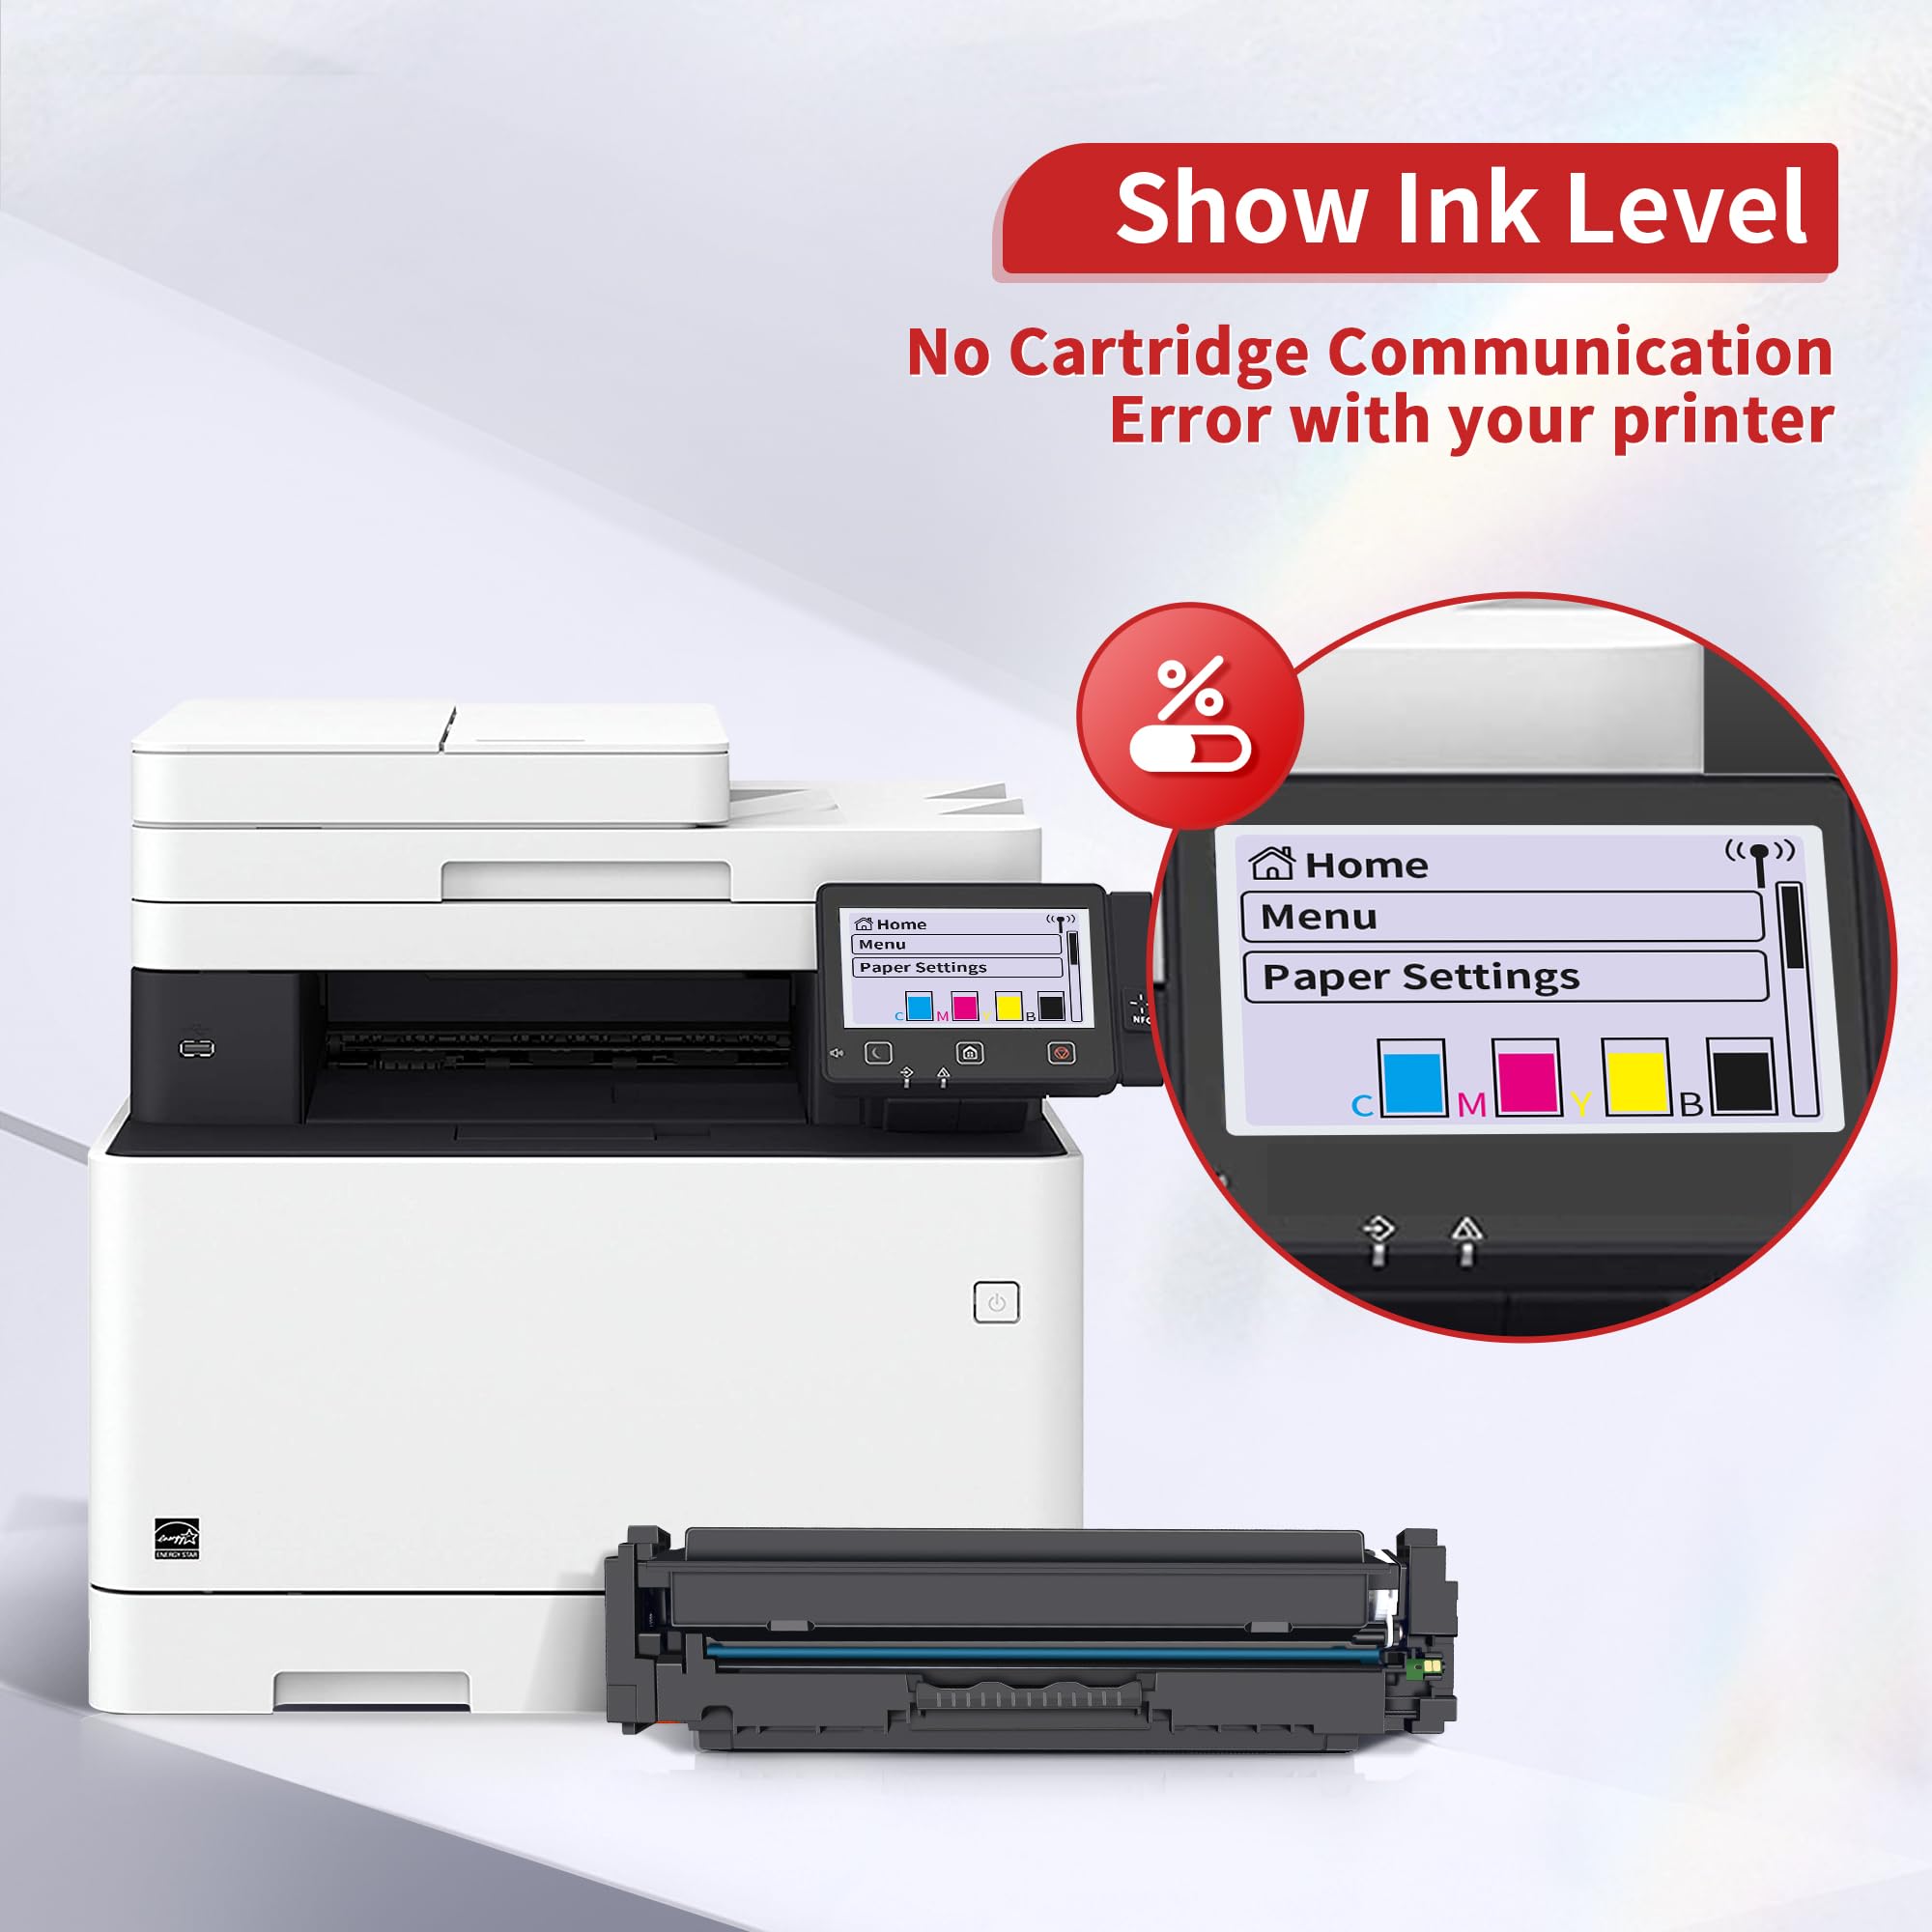 (Show Ink Level) 055 Toner Cartridge Set 055H High Capacity | Works with Canon Color ImageCLASS MF743Cdw Toner Cartridge,Canon Color ImageCLASS MF741Cdw,MF745Cdw,MF746Cdw,LBP664Cdw,LBP663Cdw Printer